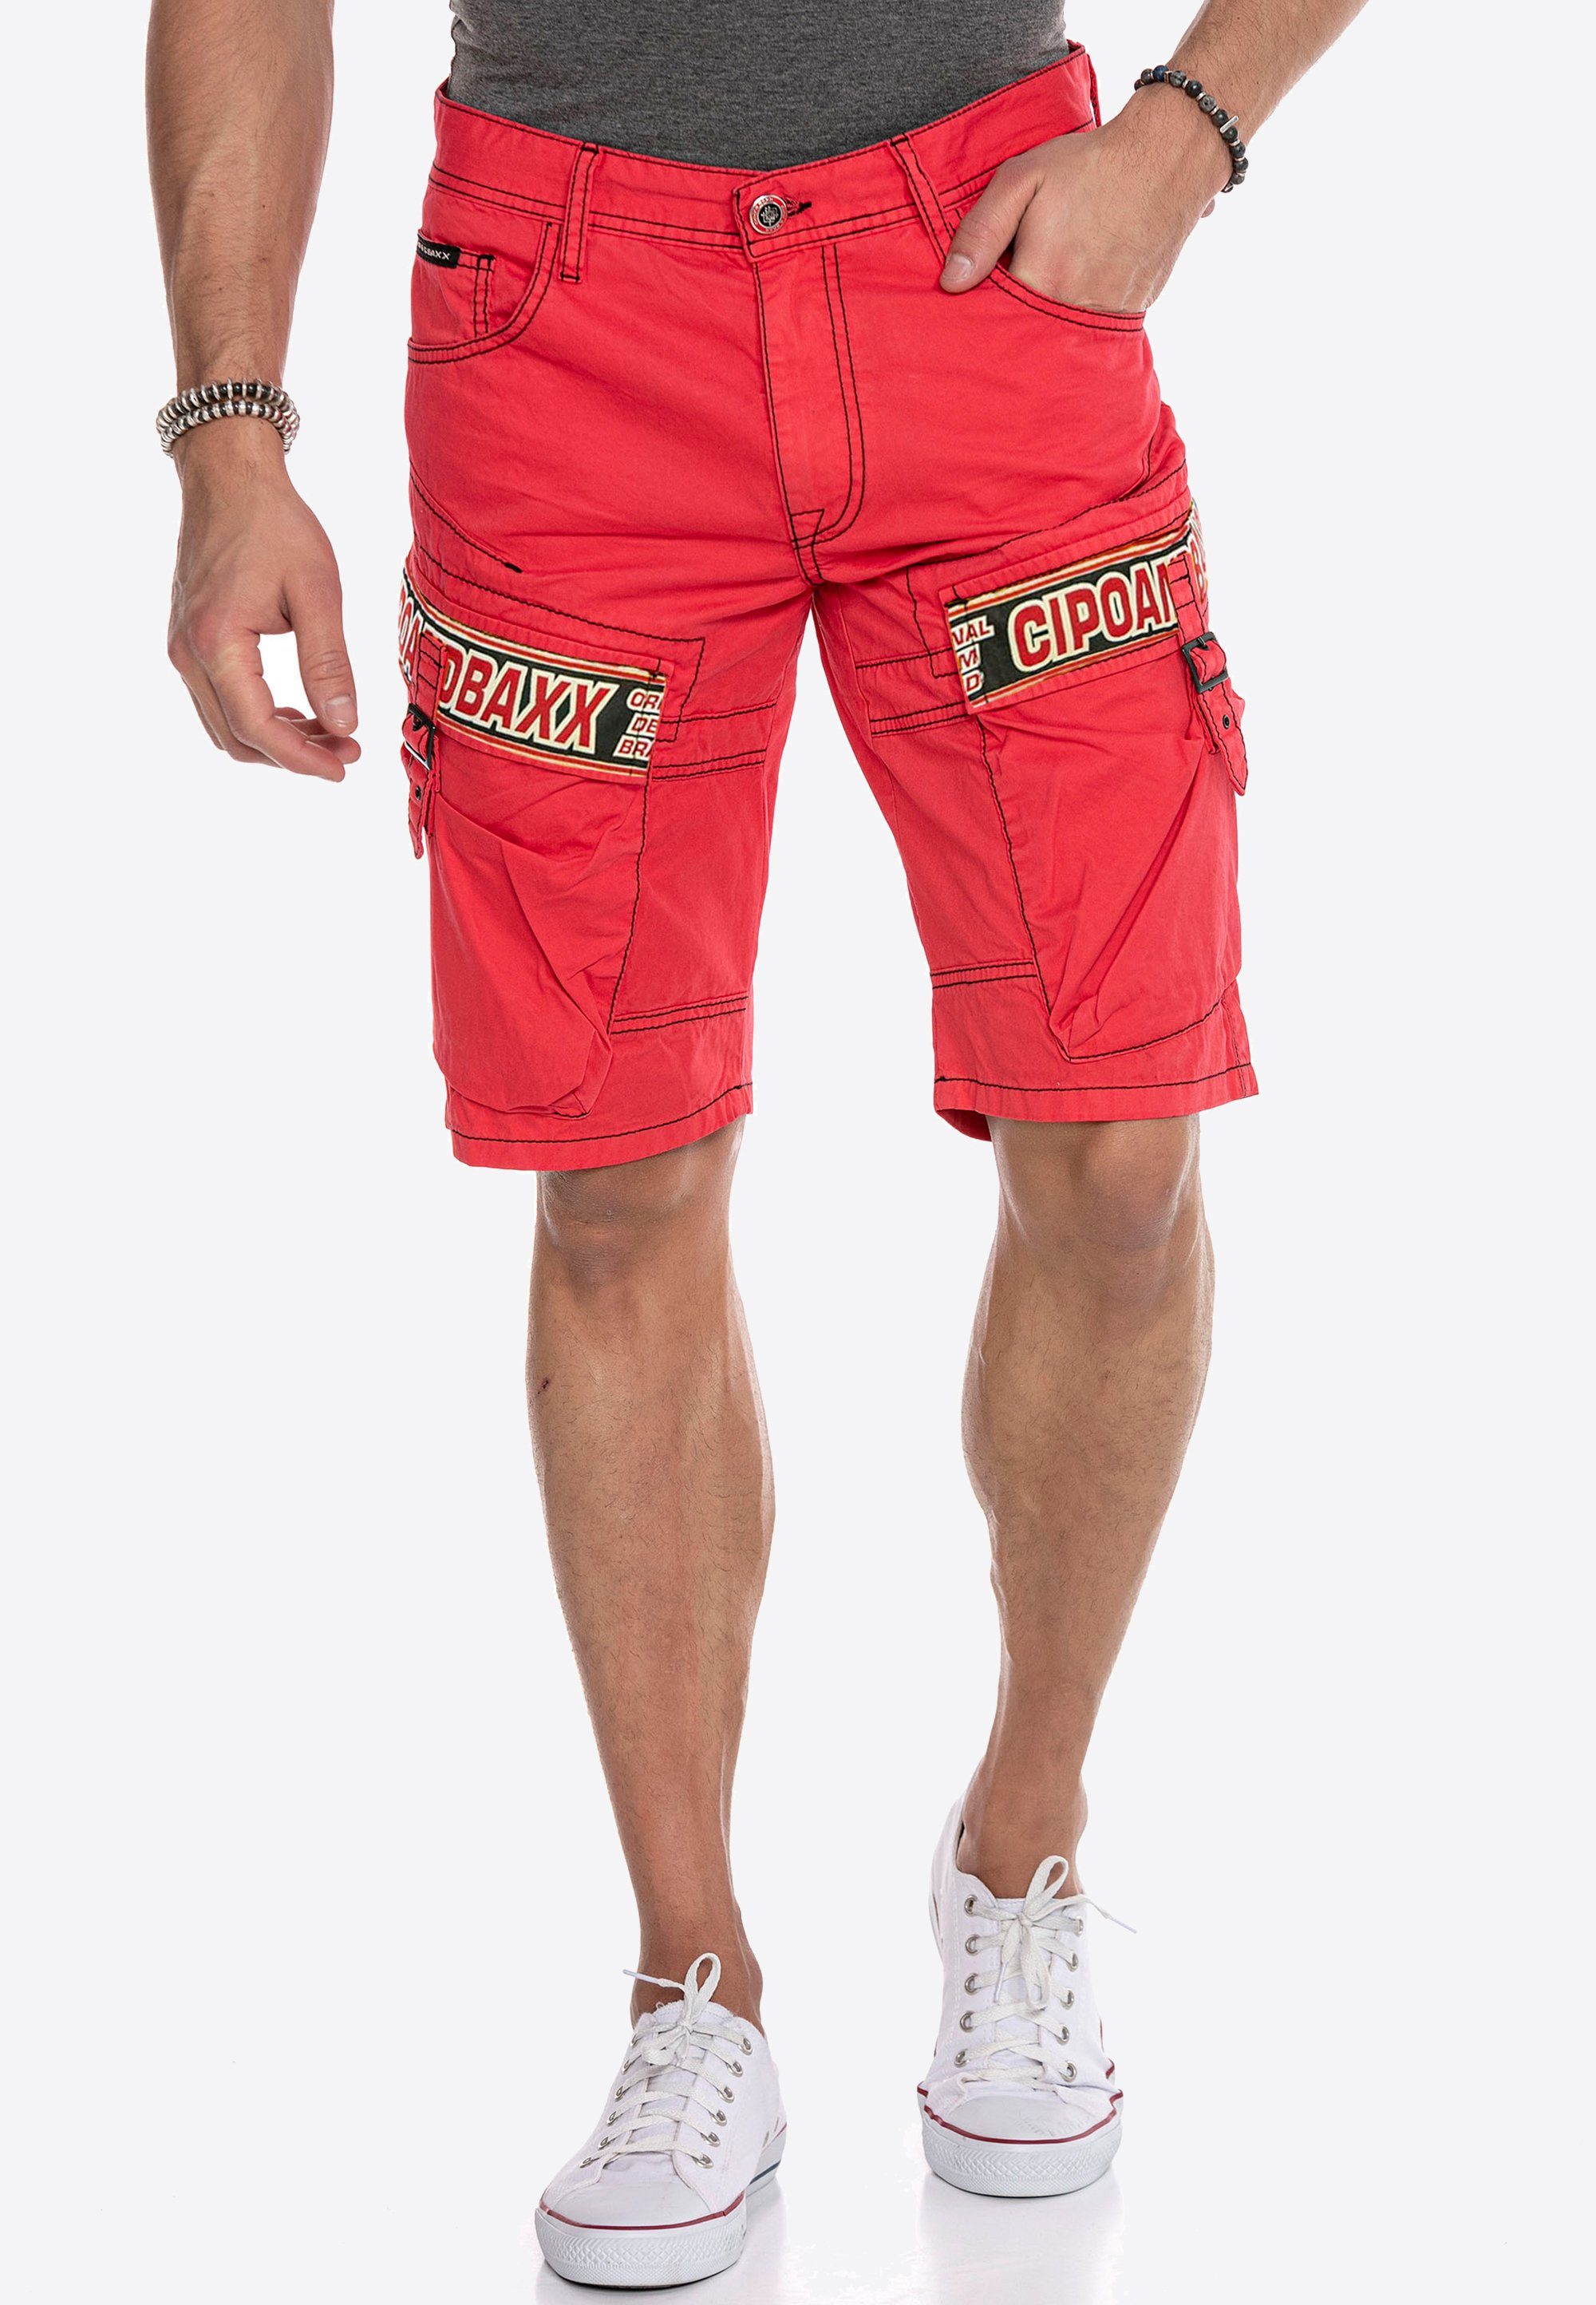 Baxx Sommer Shorts Look Cipo & im rot